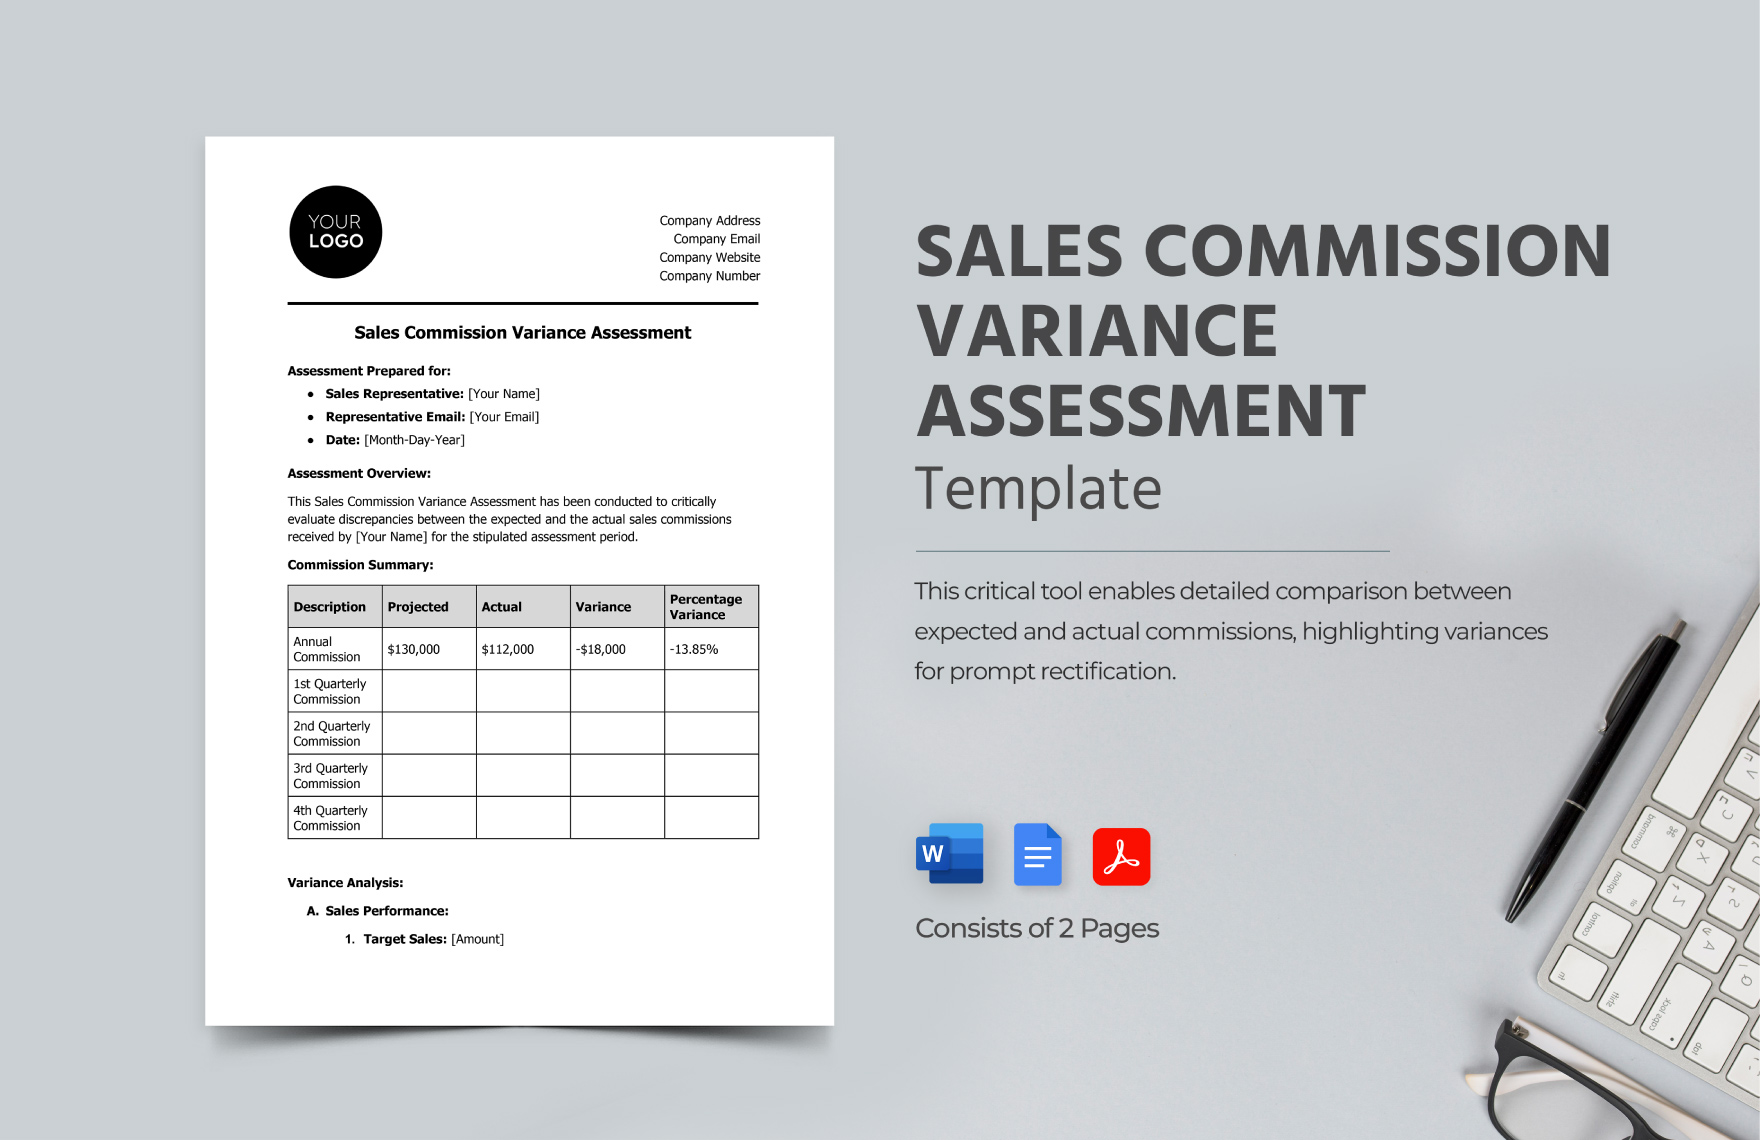 Sales Commission Variance Assessment Template